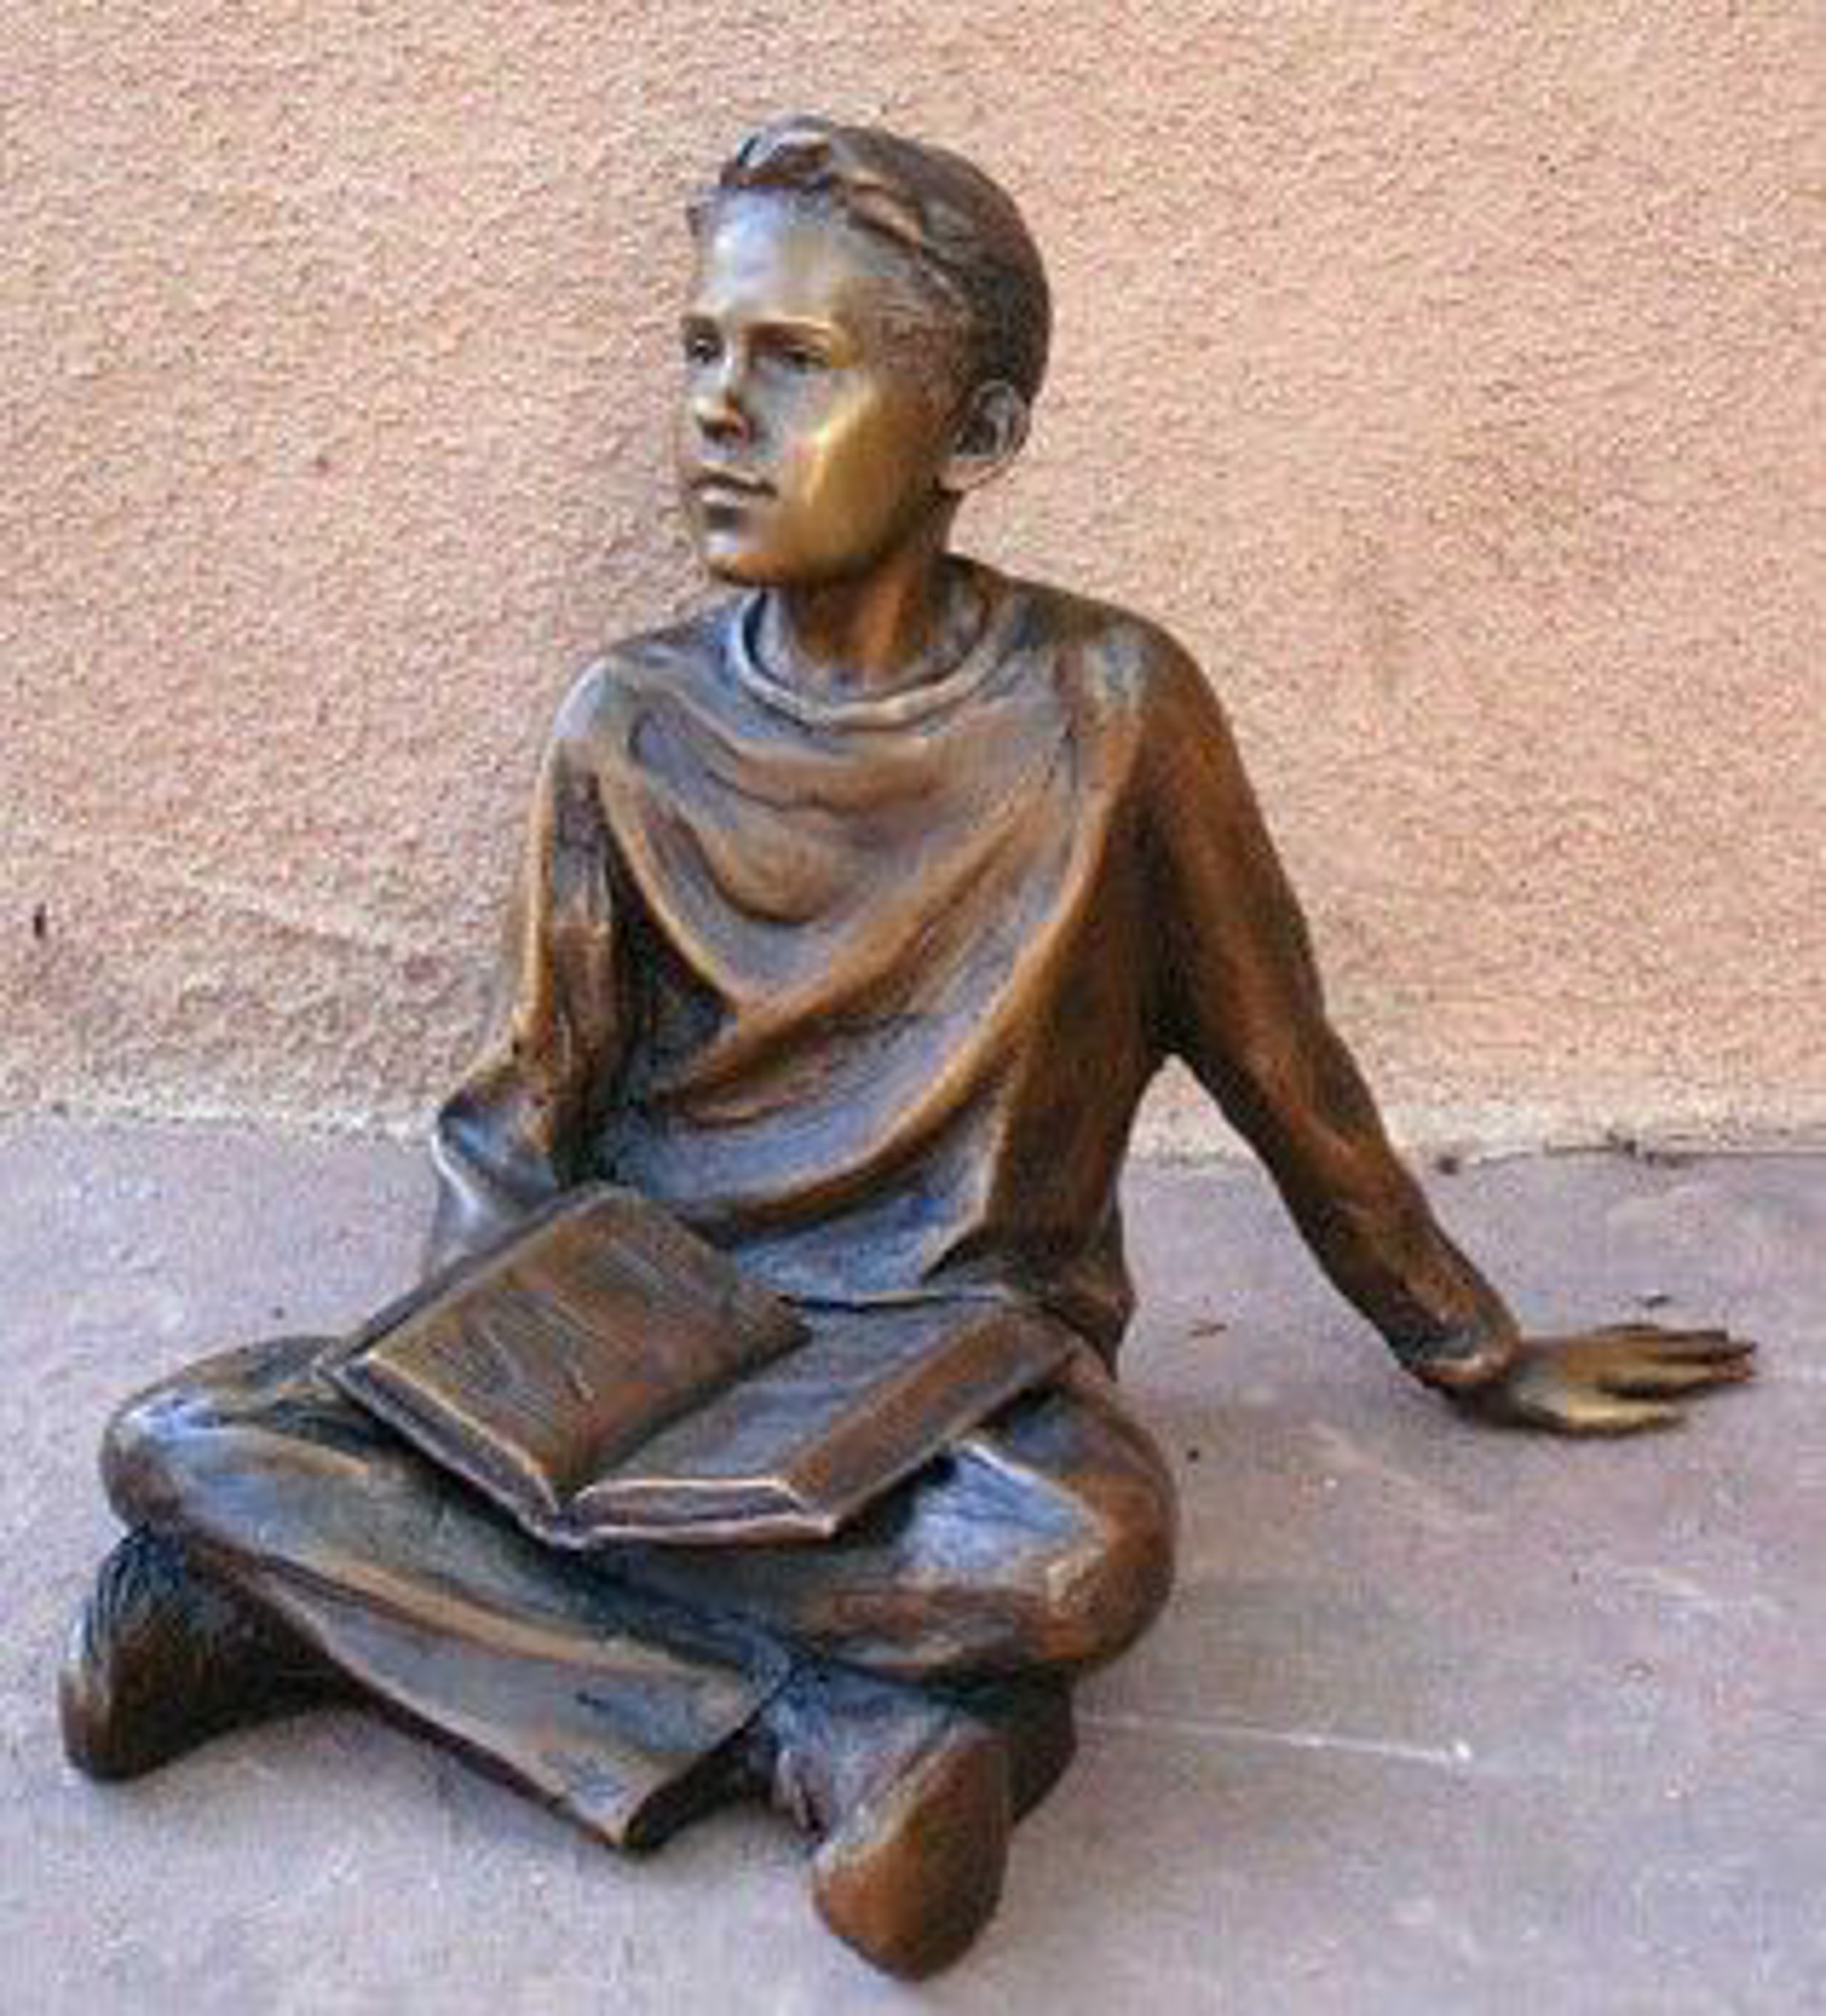 Man of the Future by Karl Jensen (sculptor)